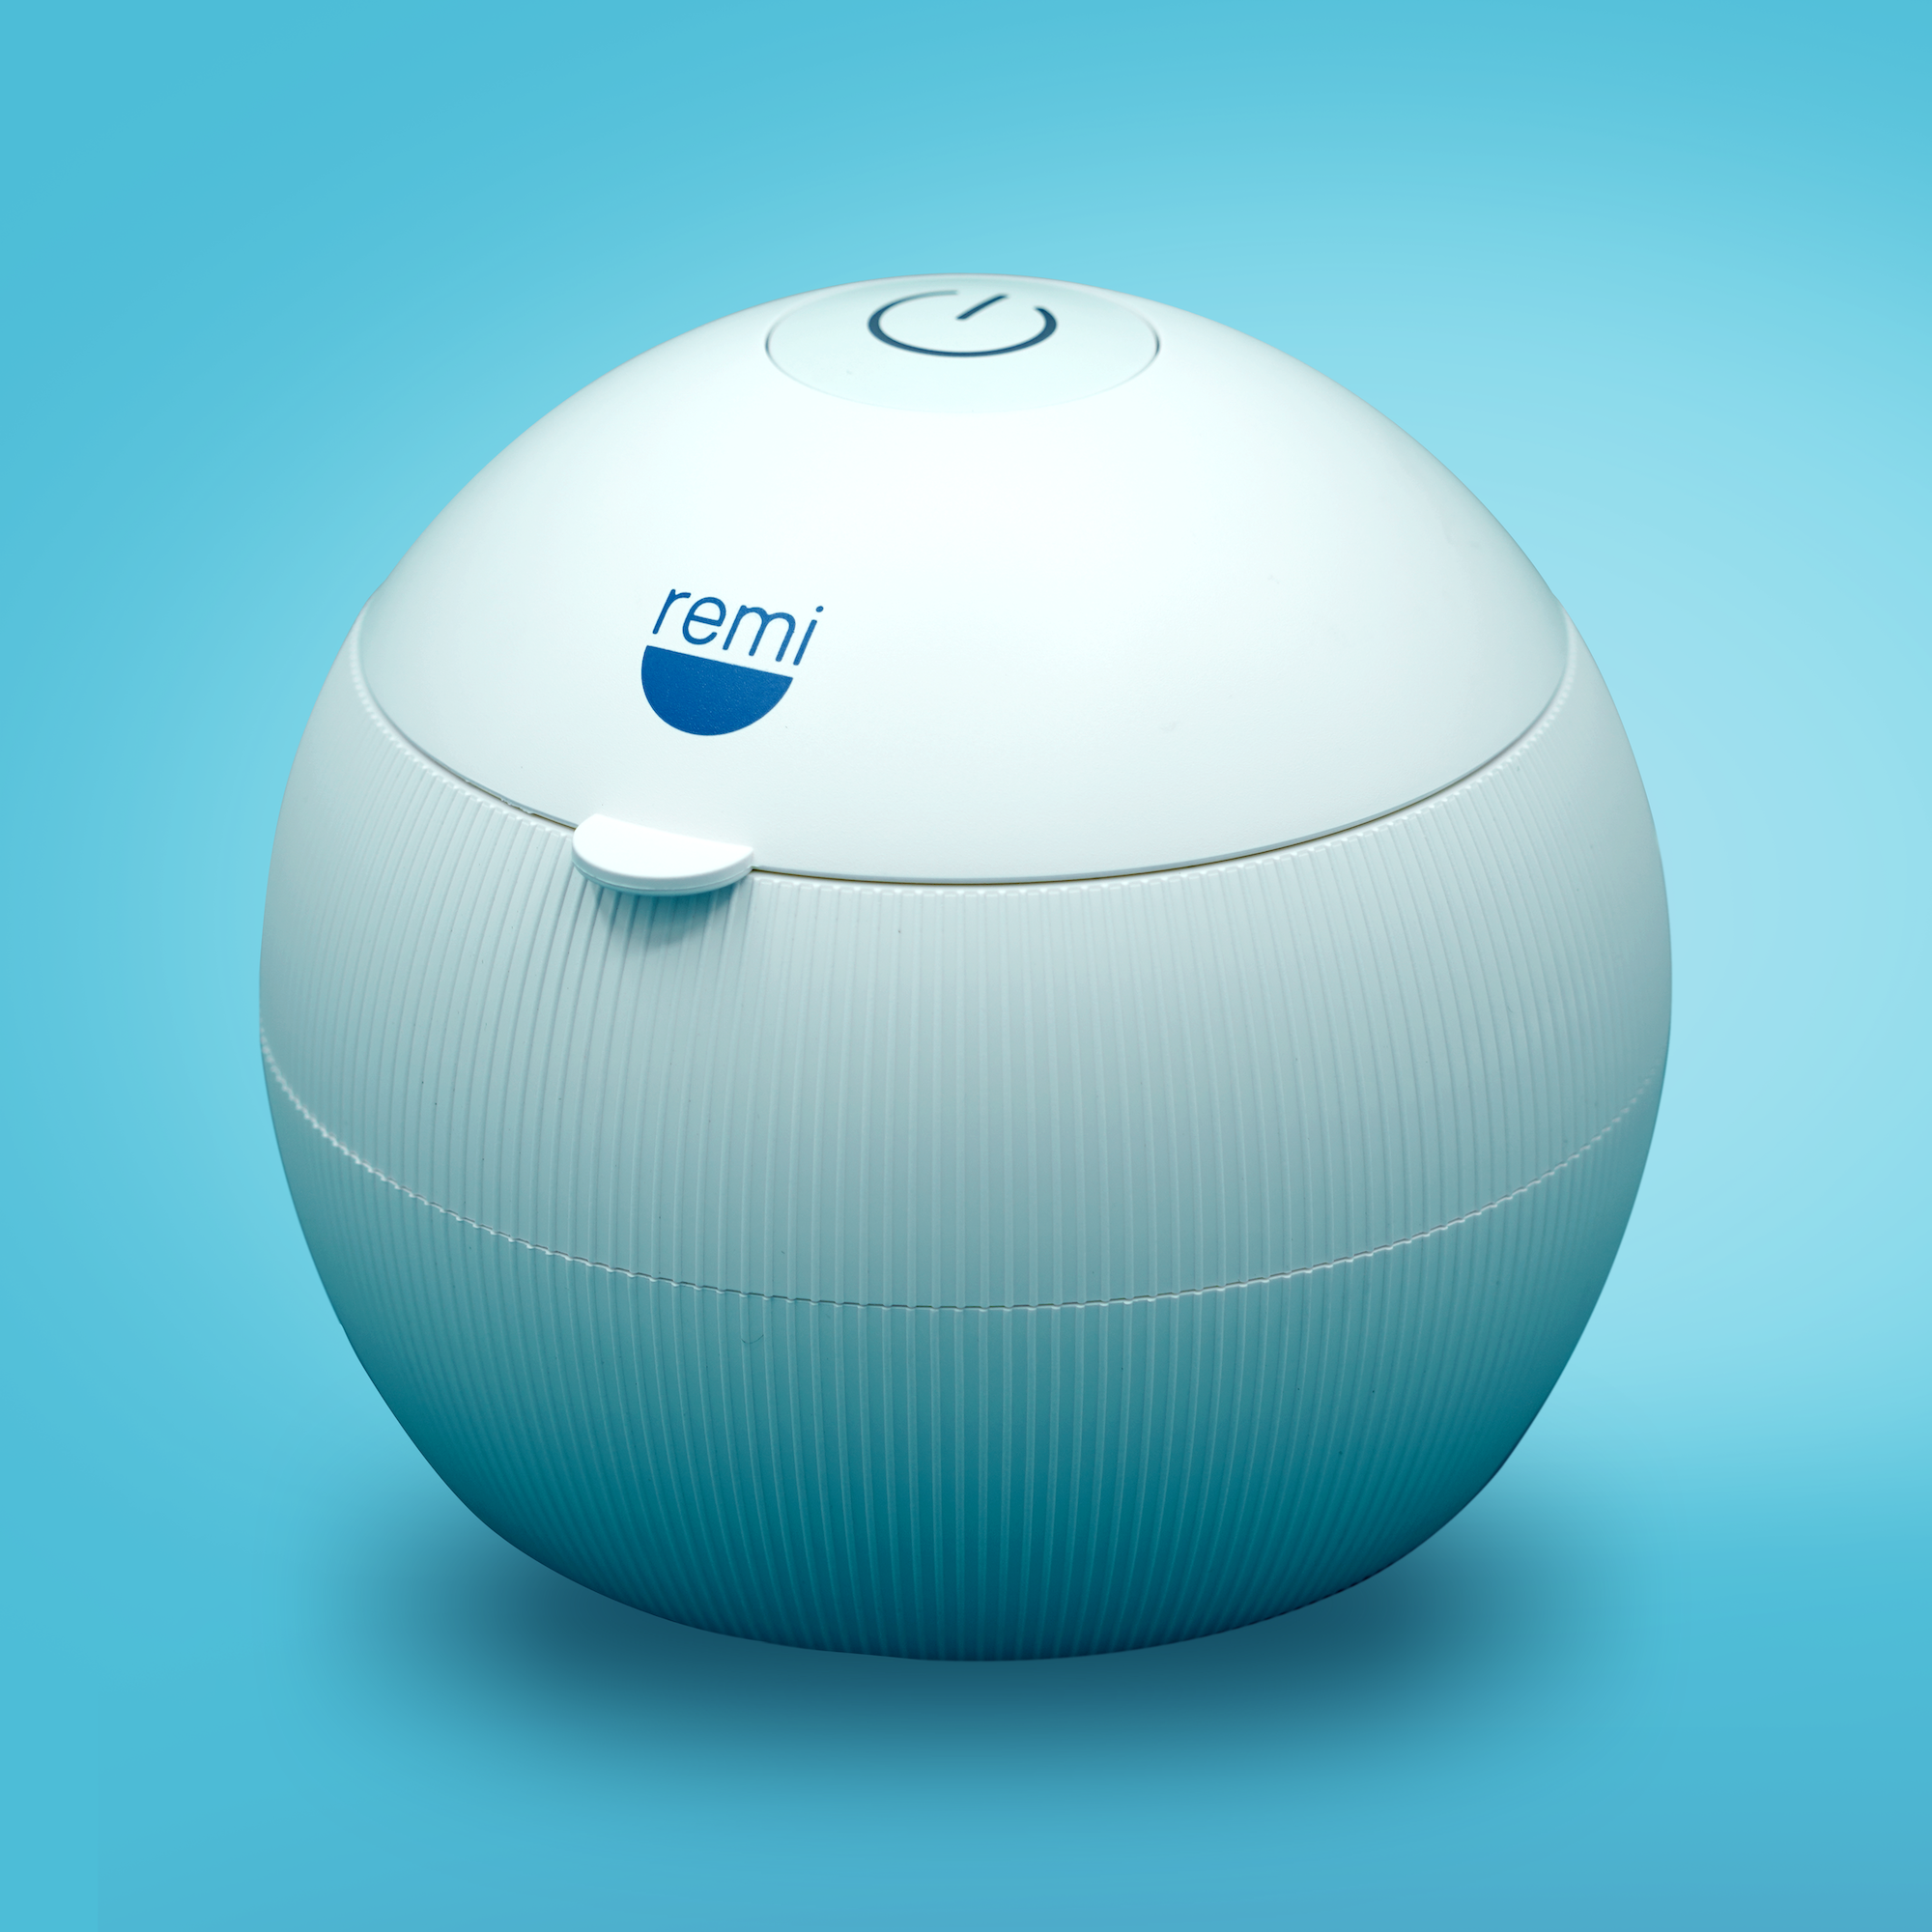 A blue and white spherical device with the label "remi" and a power symbol on top.